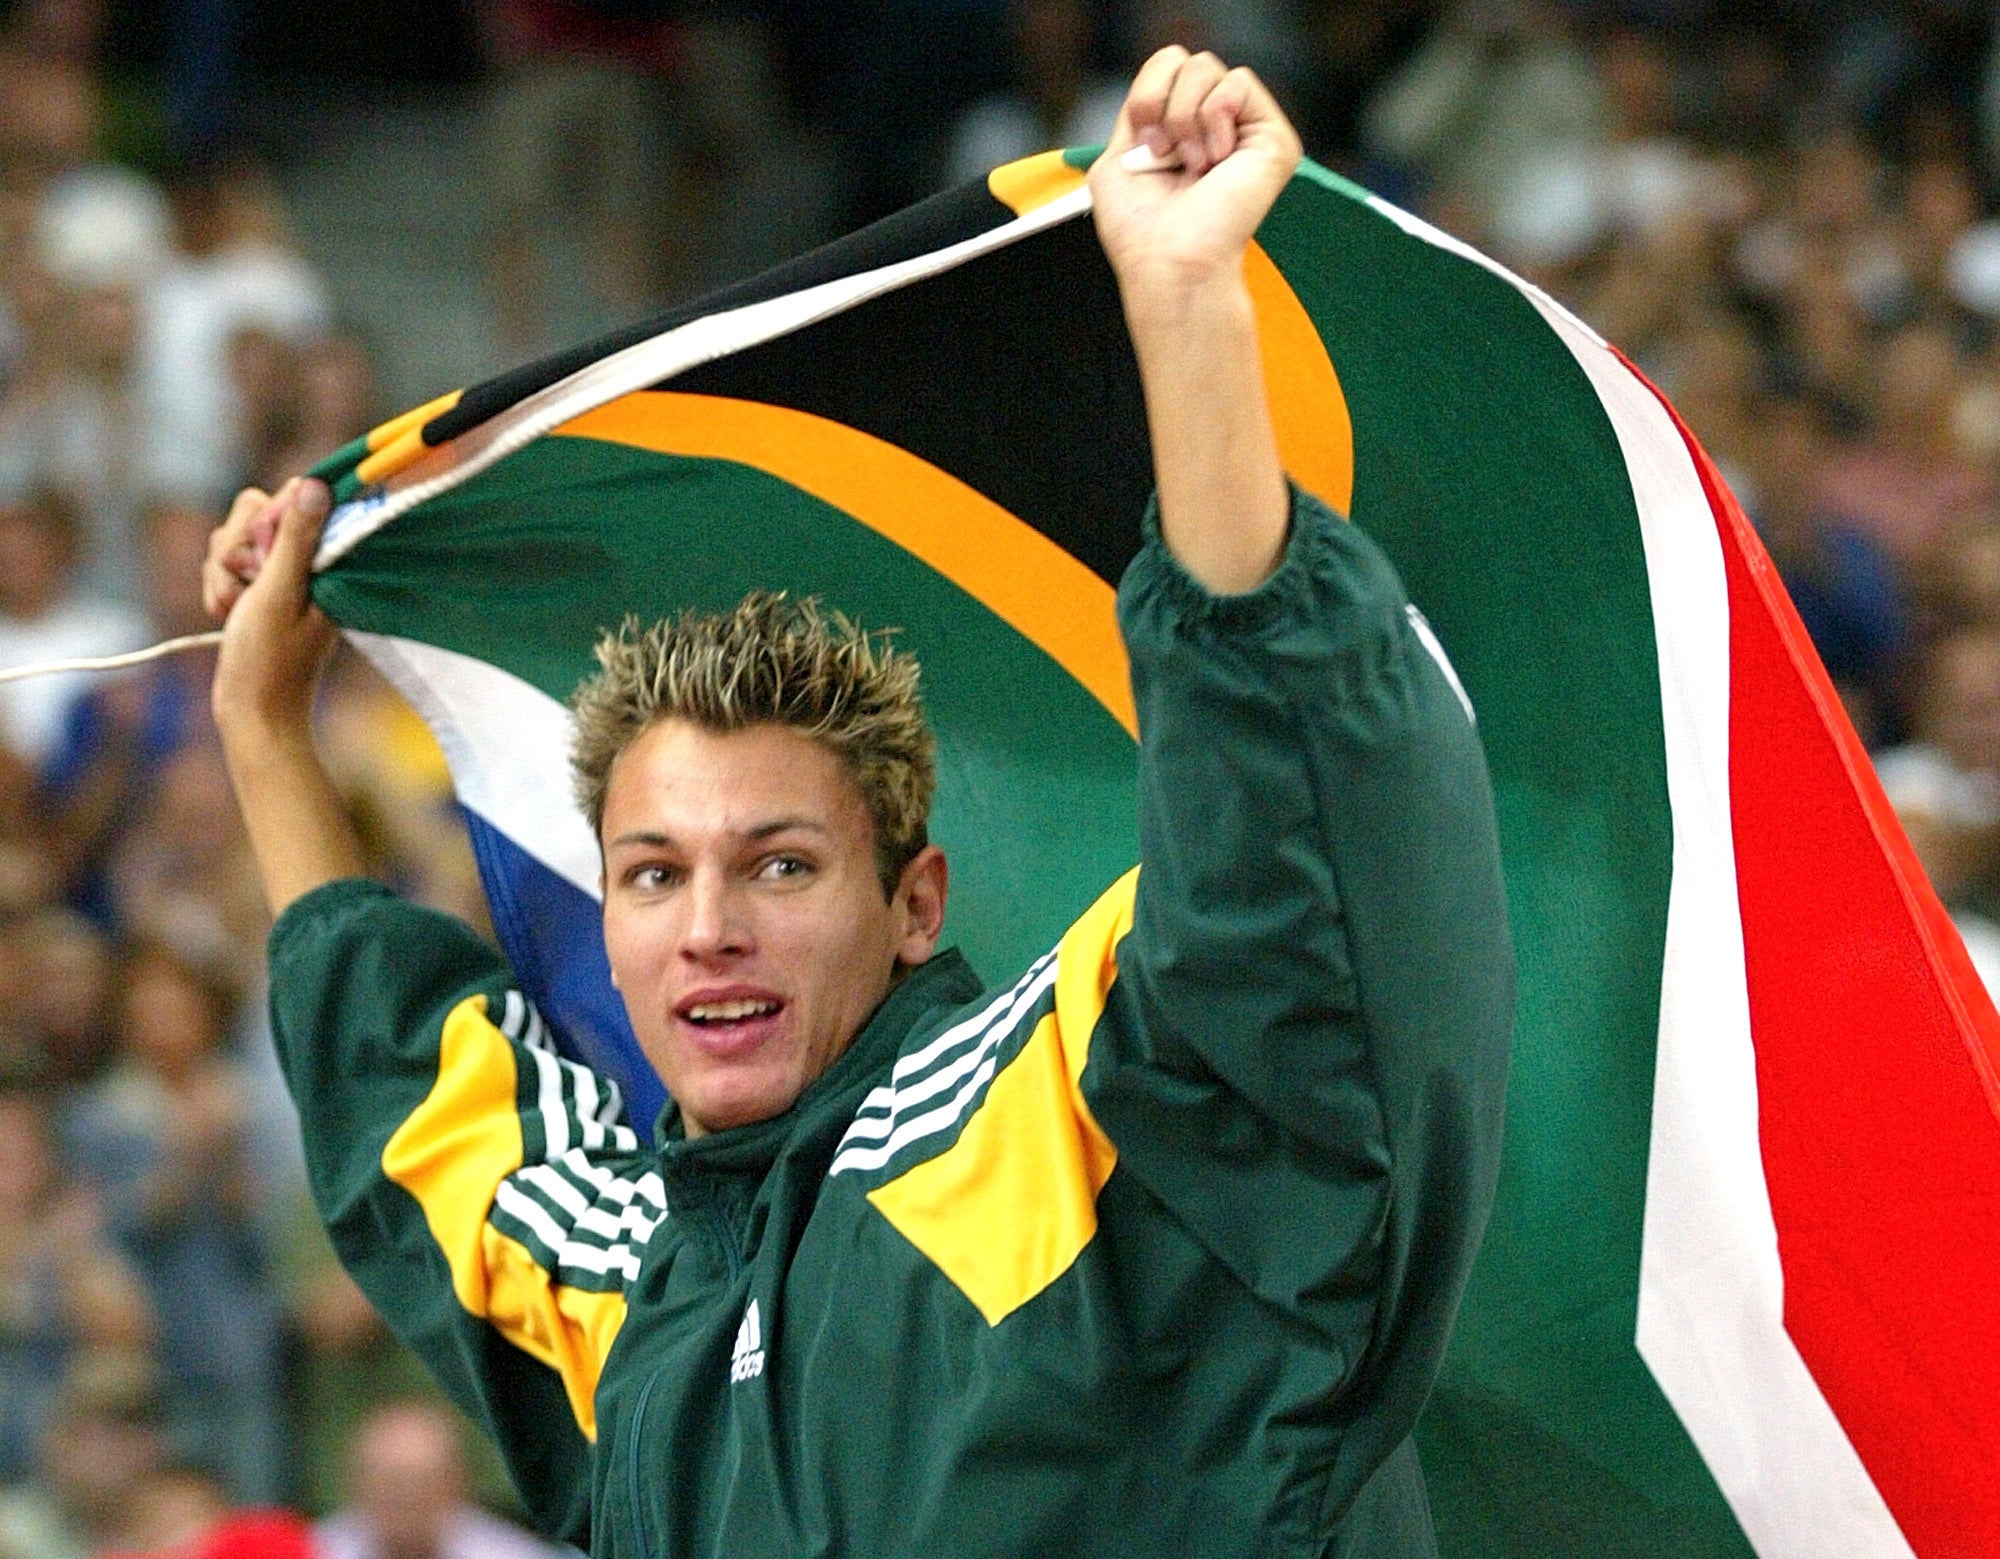 Jacques Freitag won world gold in 2003 but has been found dead at the age of 42